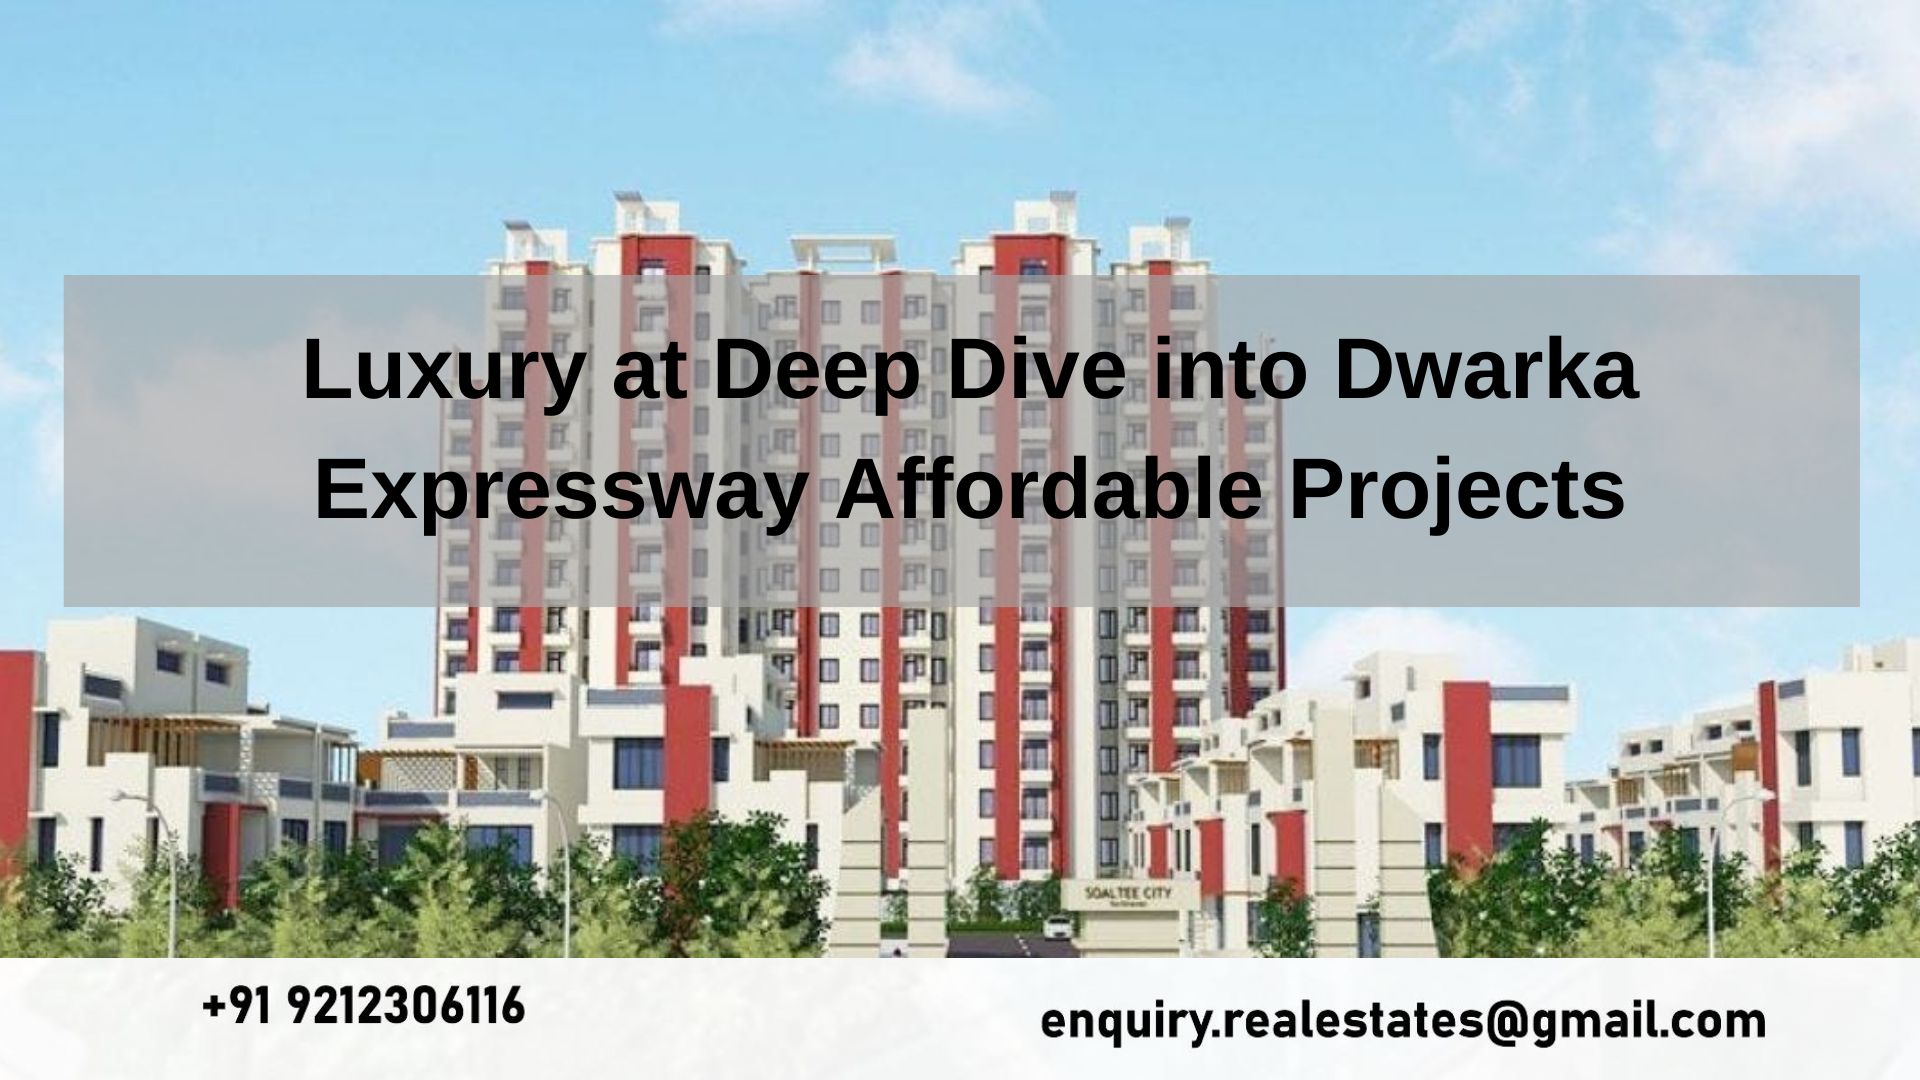 Luxury at Deep Dive into Dwarka Expressway Affordable Projects